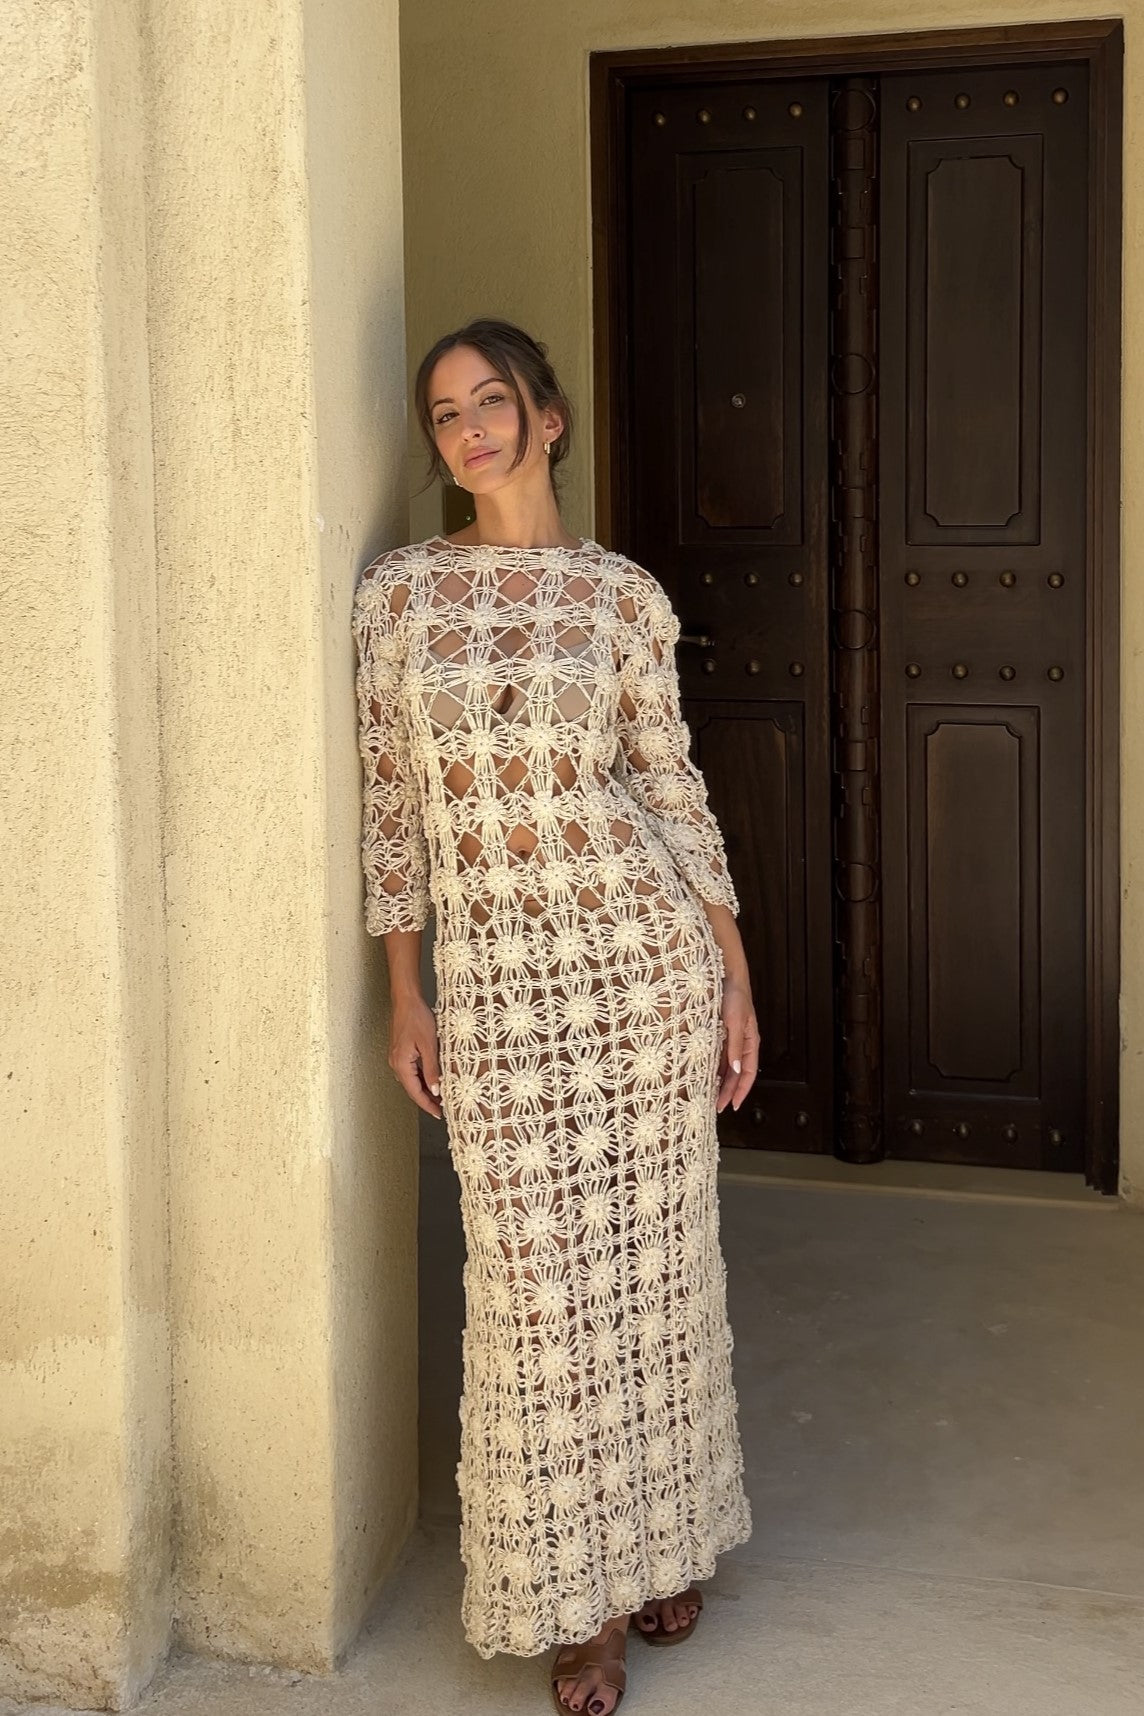 BEIGE HANDMADE LONG DRESS WITH KNITTED FLOWERS